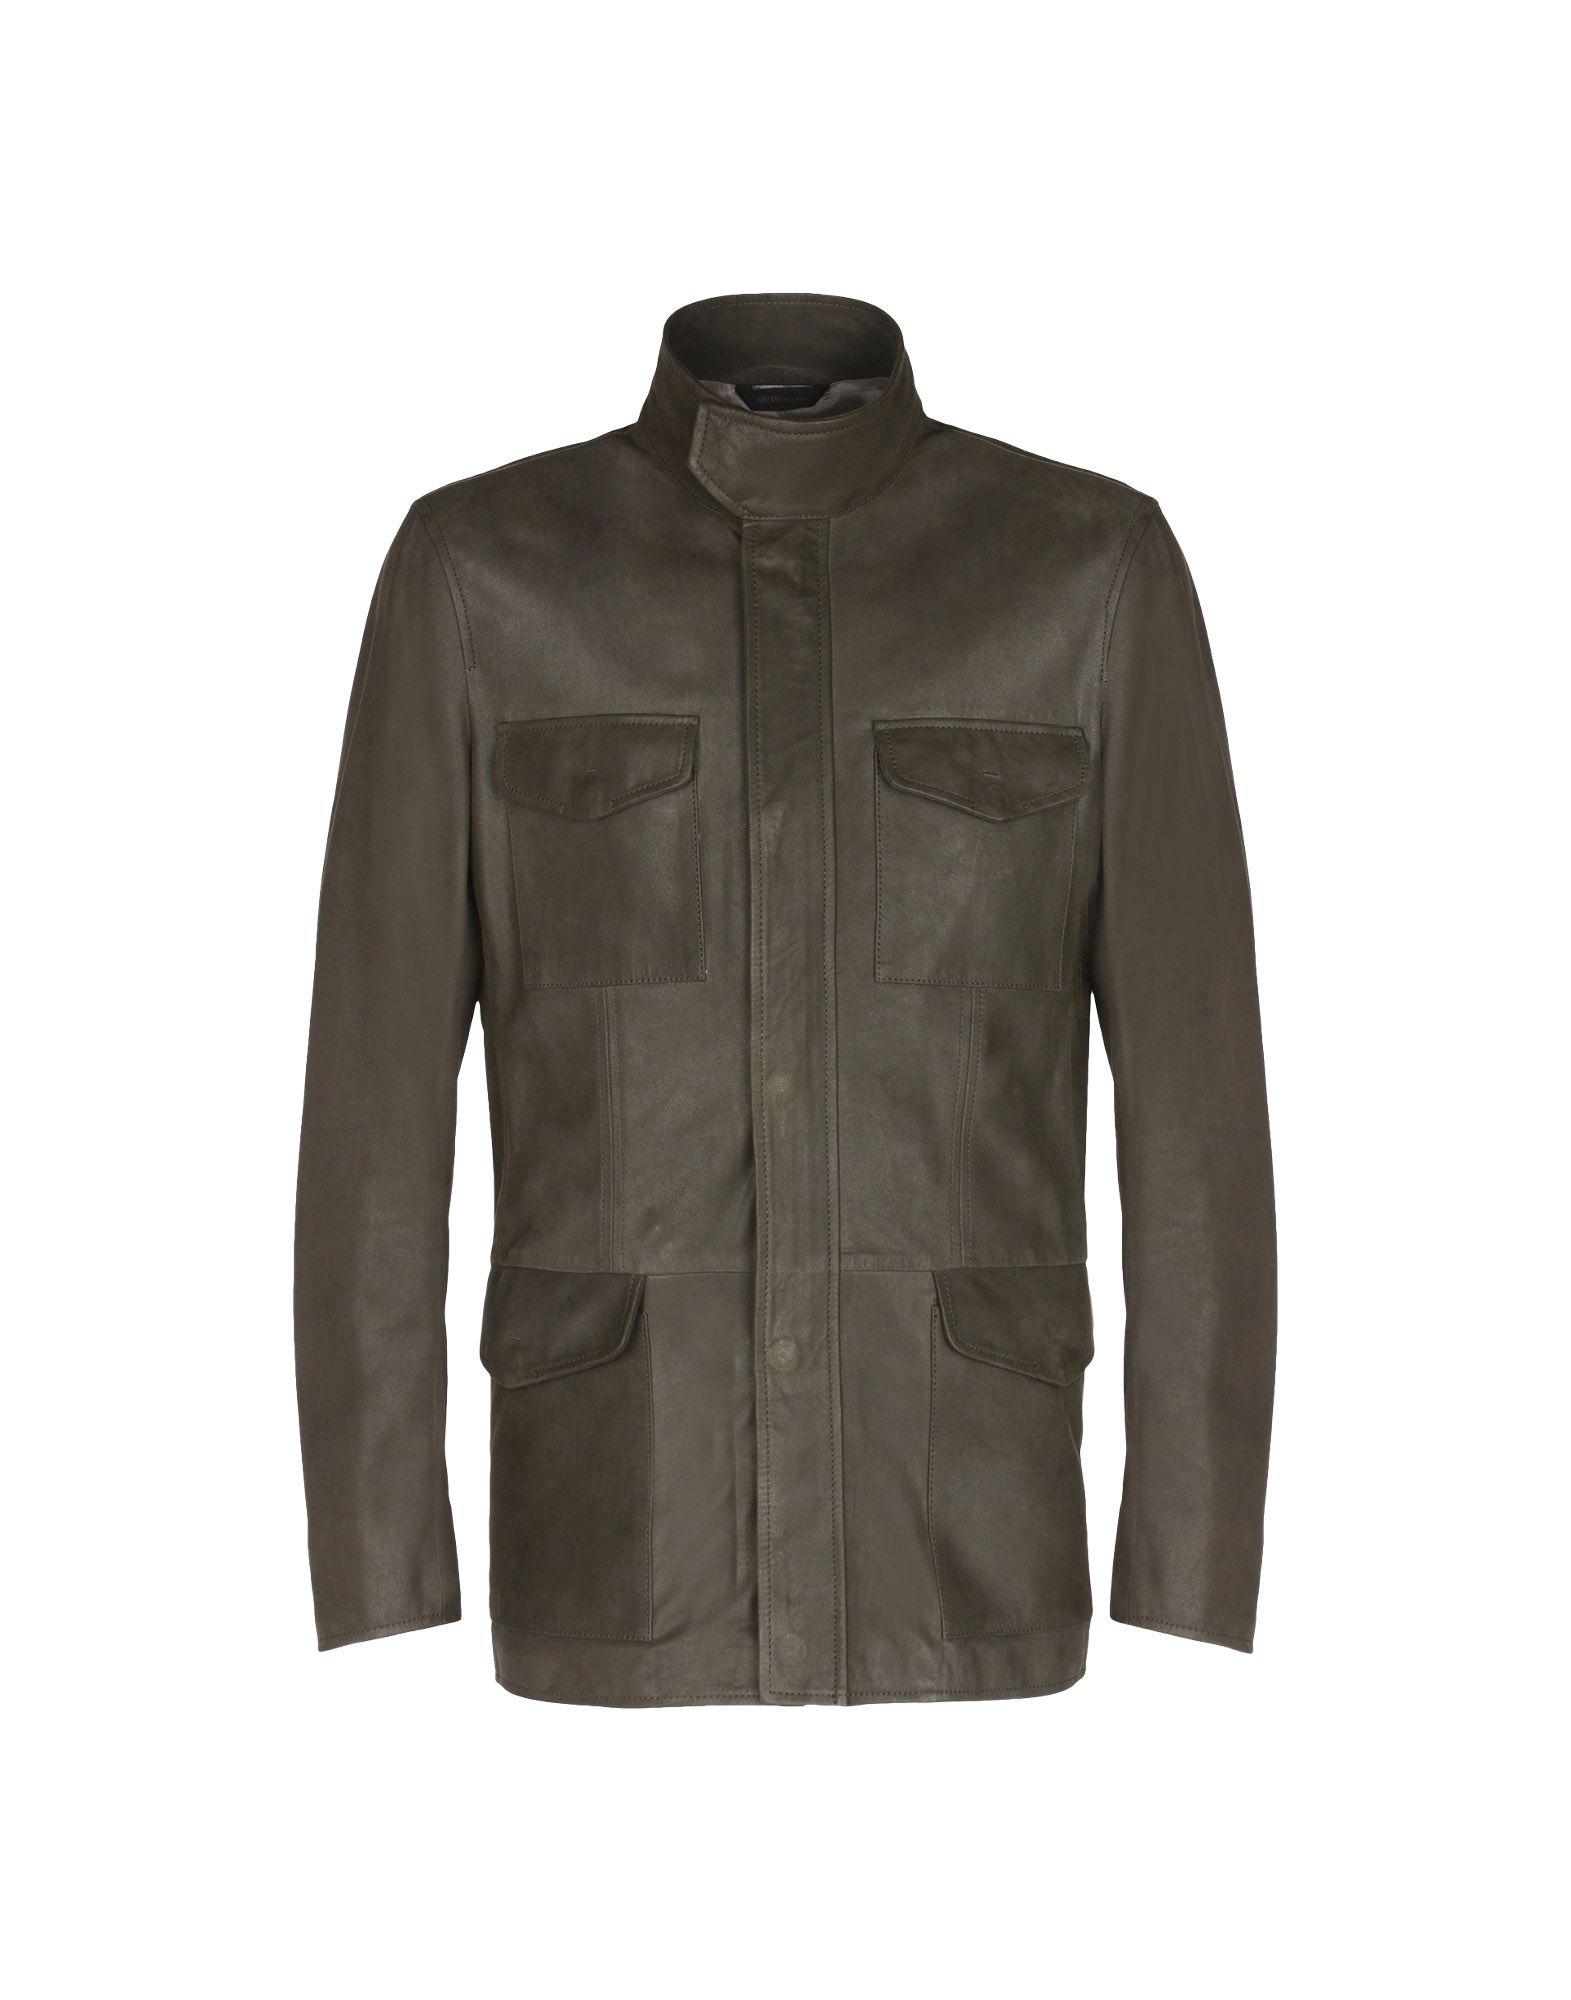 Armani Jacket in Military Green (Green) for Men - Lyst